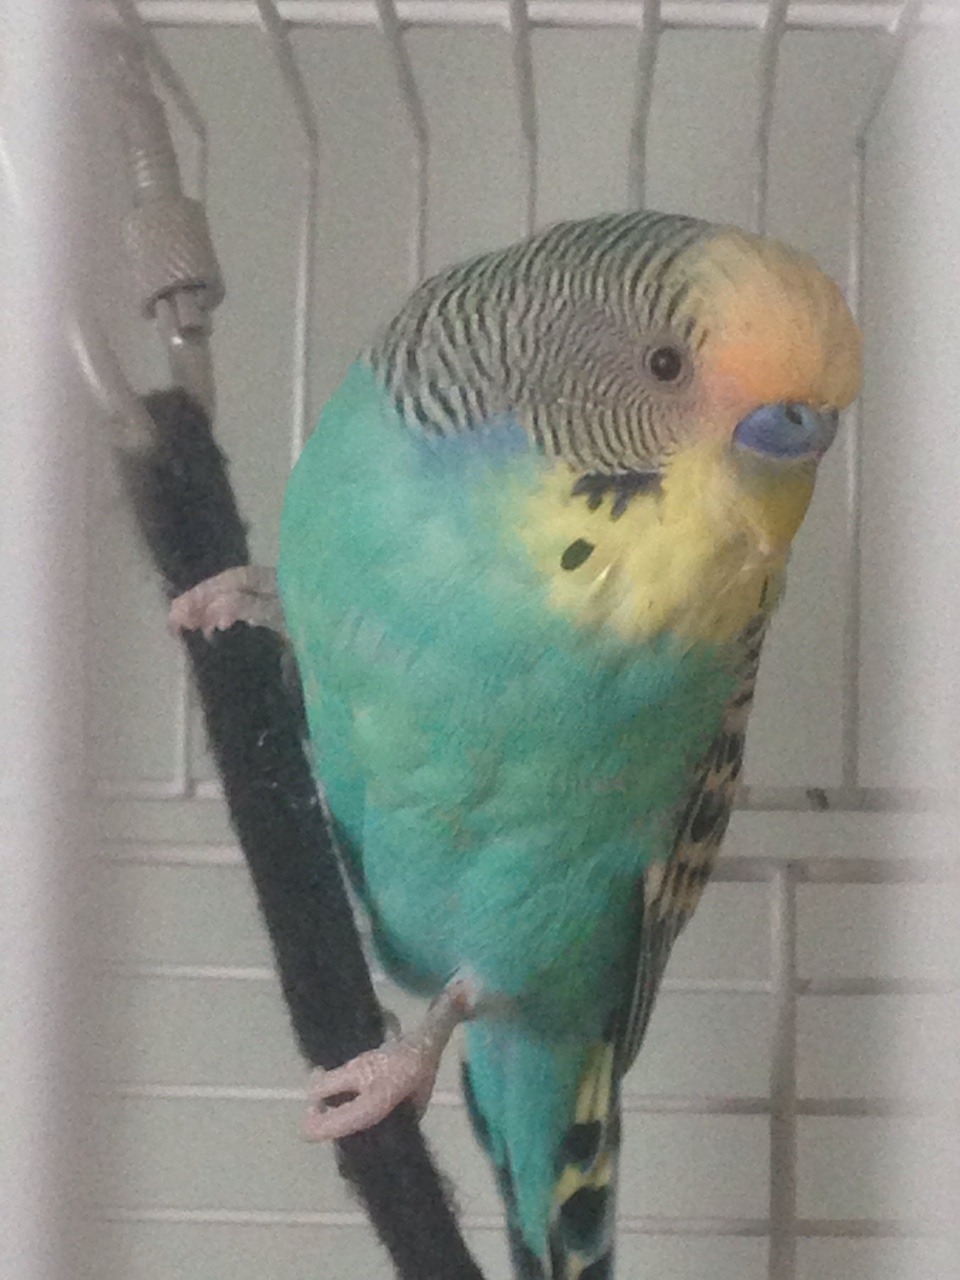 here is a picture of my budgie for people asking! right near his eye/beak is darker